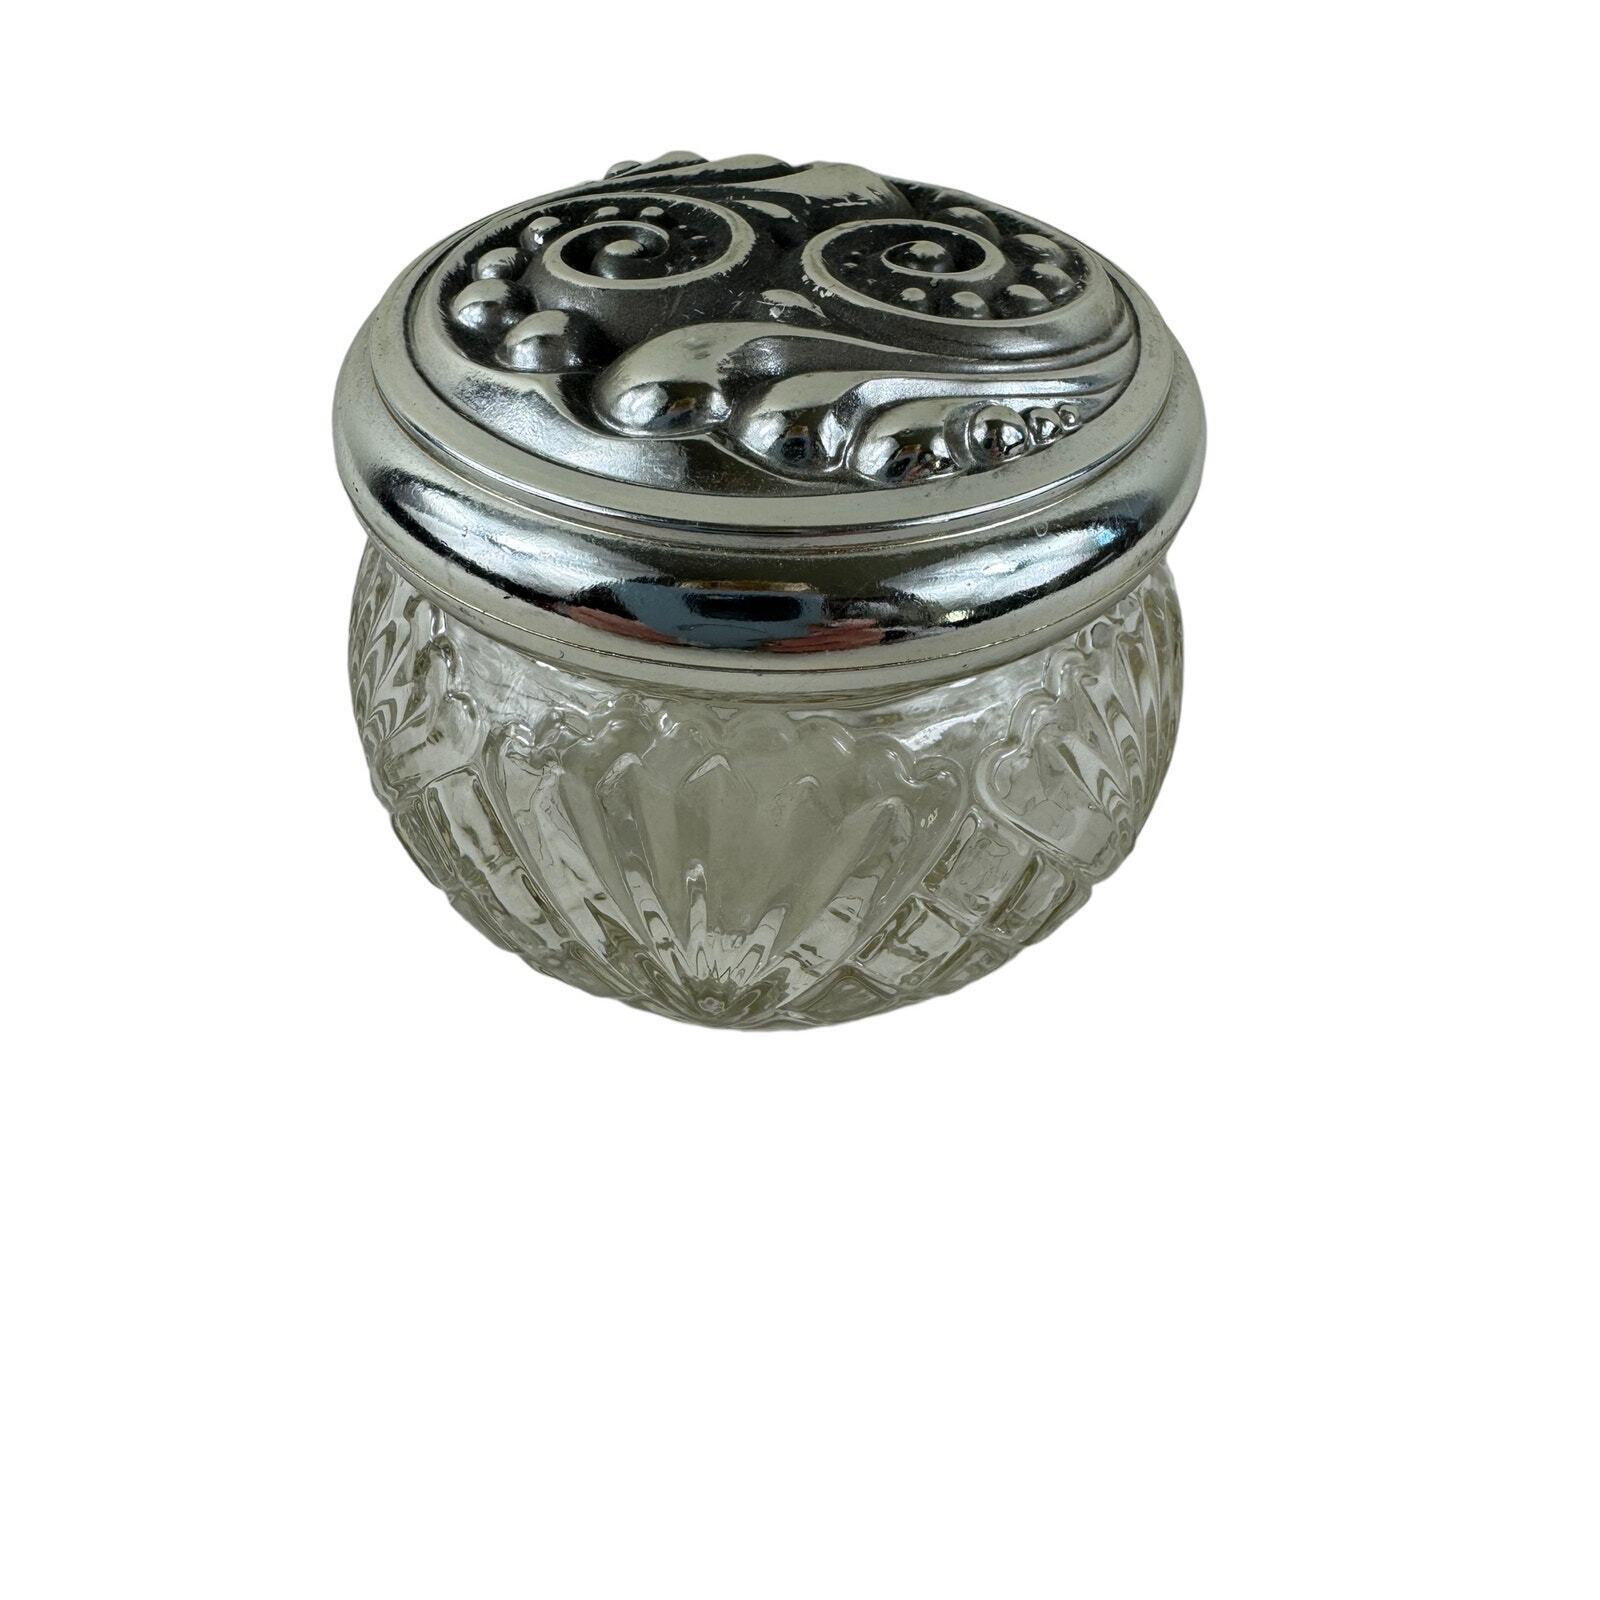 Avon Vintage Collectible Empty Glass Jar Silver Plate Embossed Lid Decorative